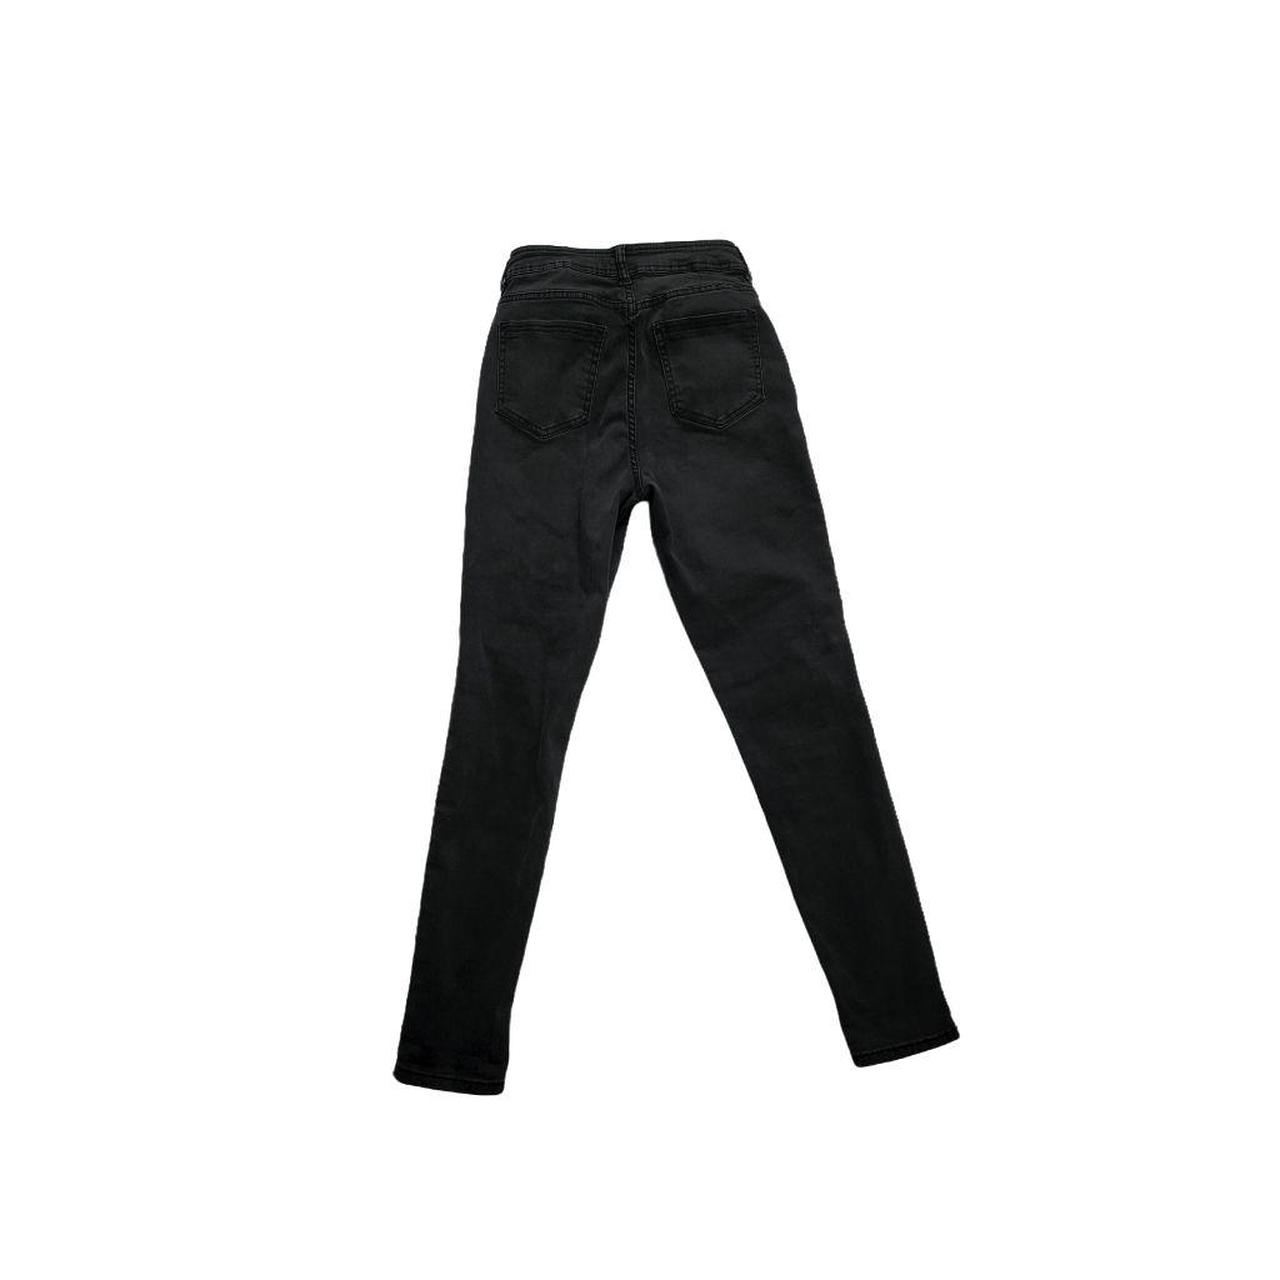 Product Image 2 - •faded black jeans
•moto design
•high rise
•skinny

Approximate